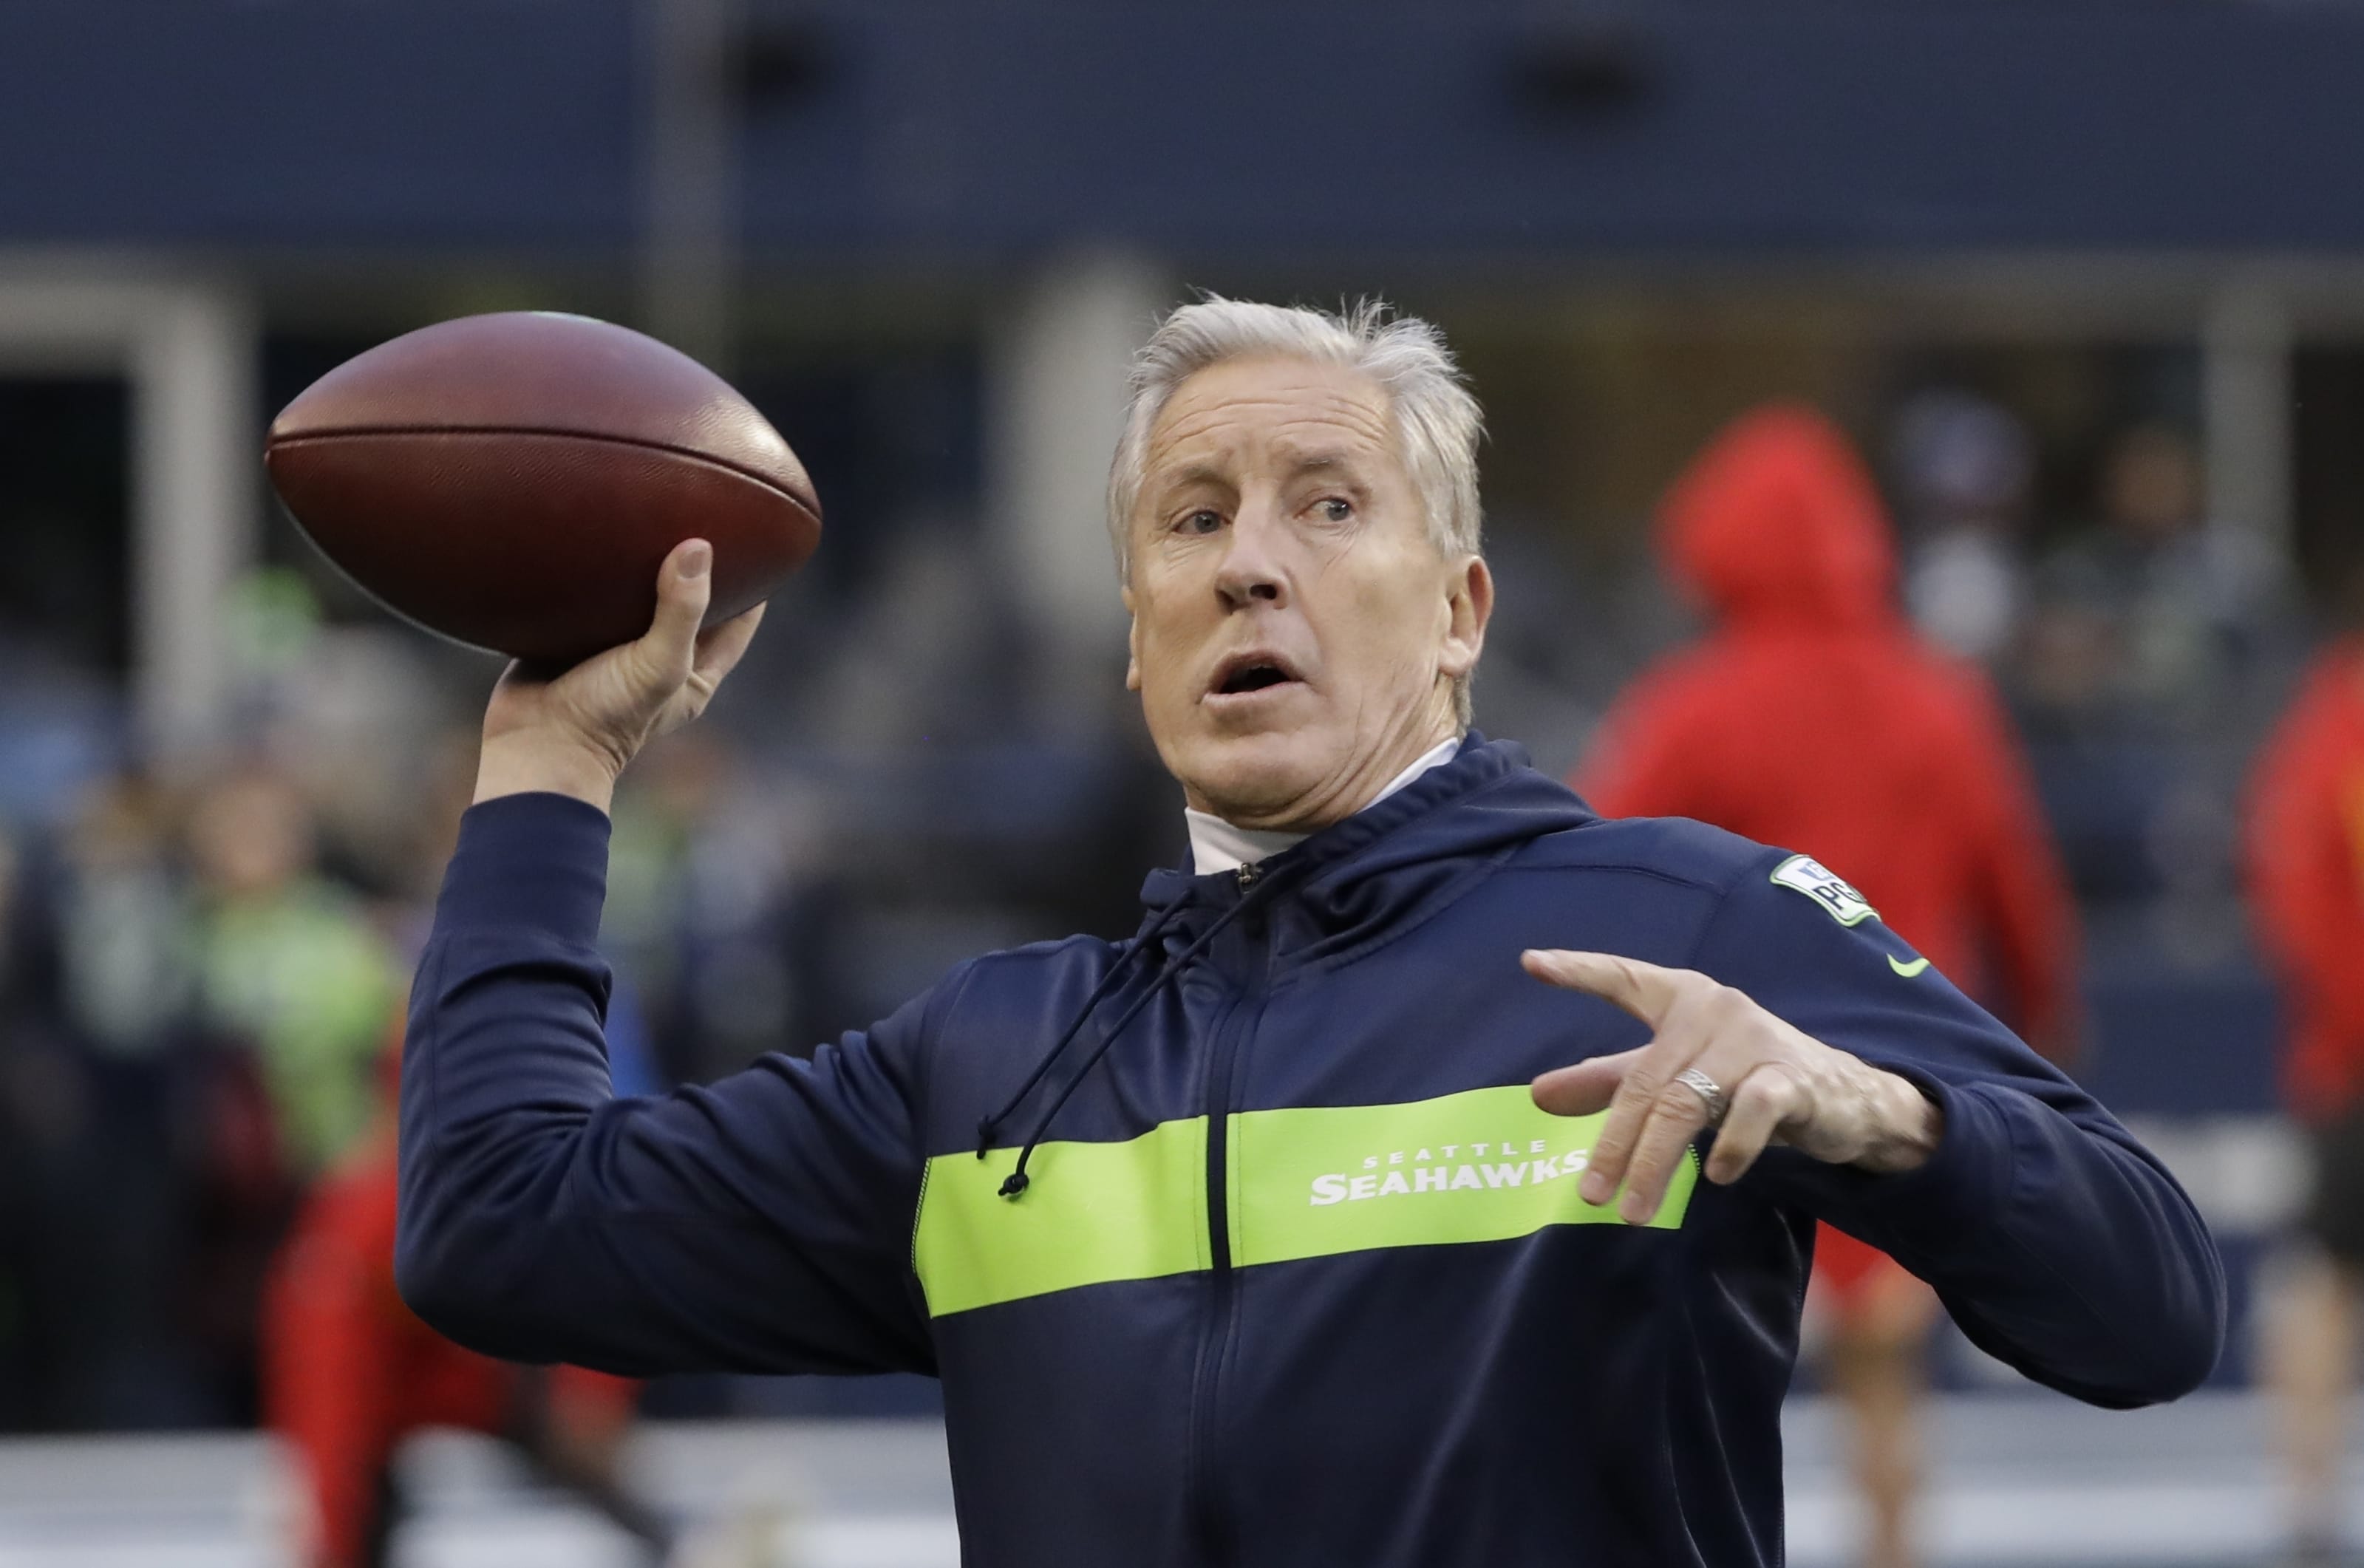 Seattle Seahawks head coach Pete Carroll passes during warmups before an NFL football game against the Kansas City Chiefs, Sunday, Dec. 23, 2018, in Seattle.